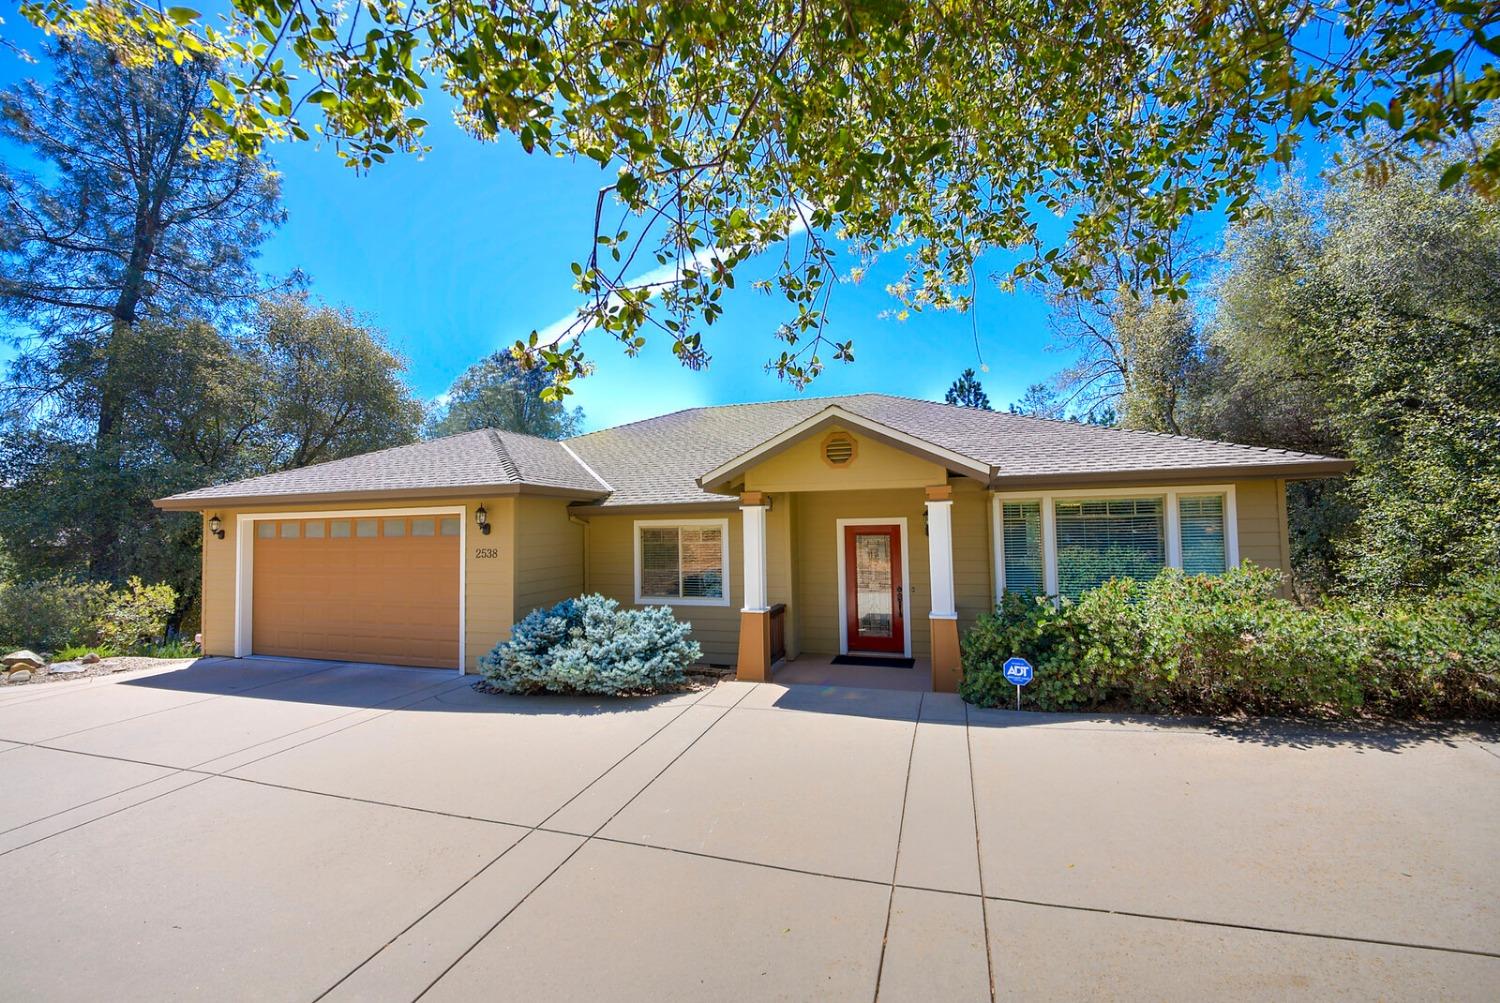 Photo of 2538 Bedford Ave in Placerville, CA